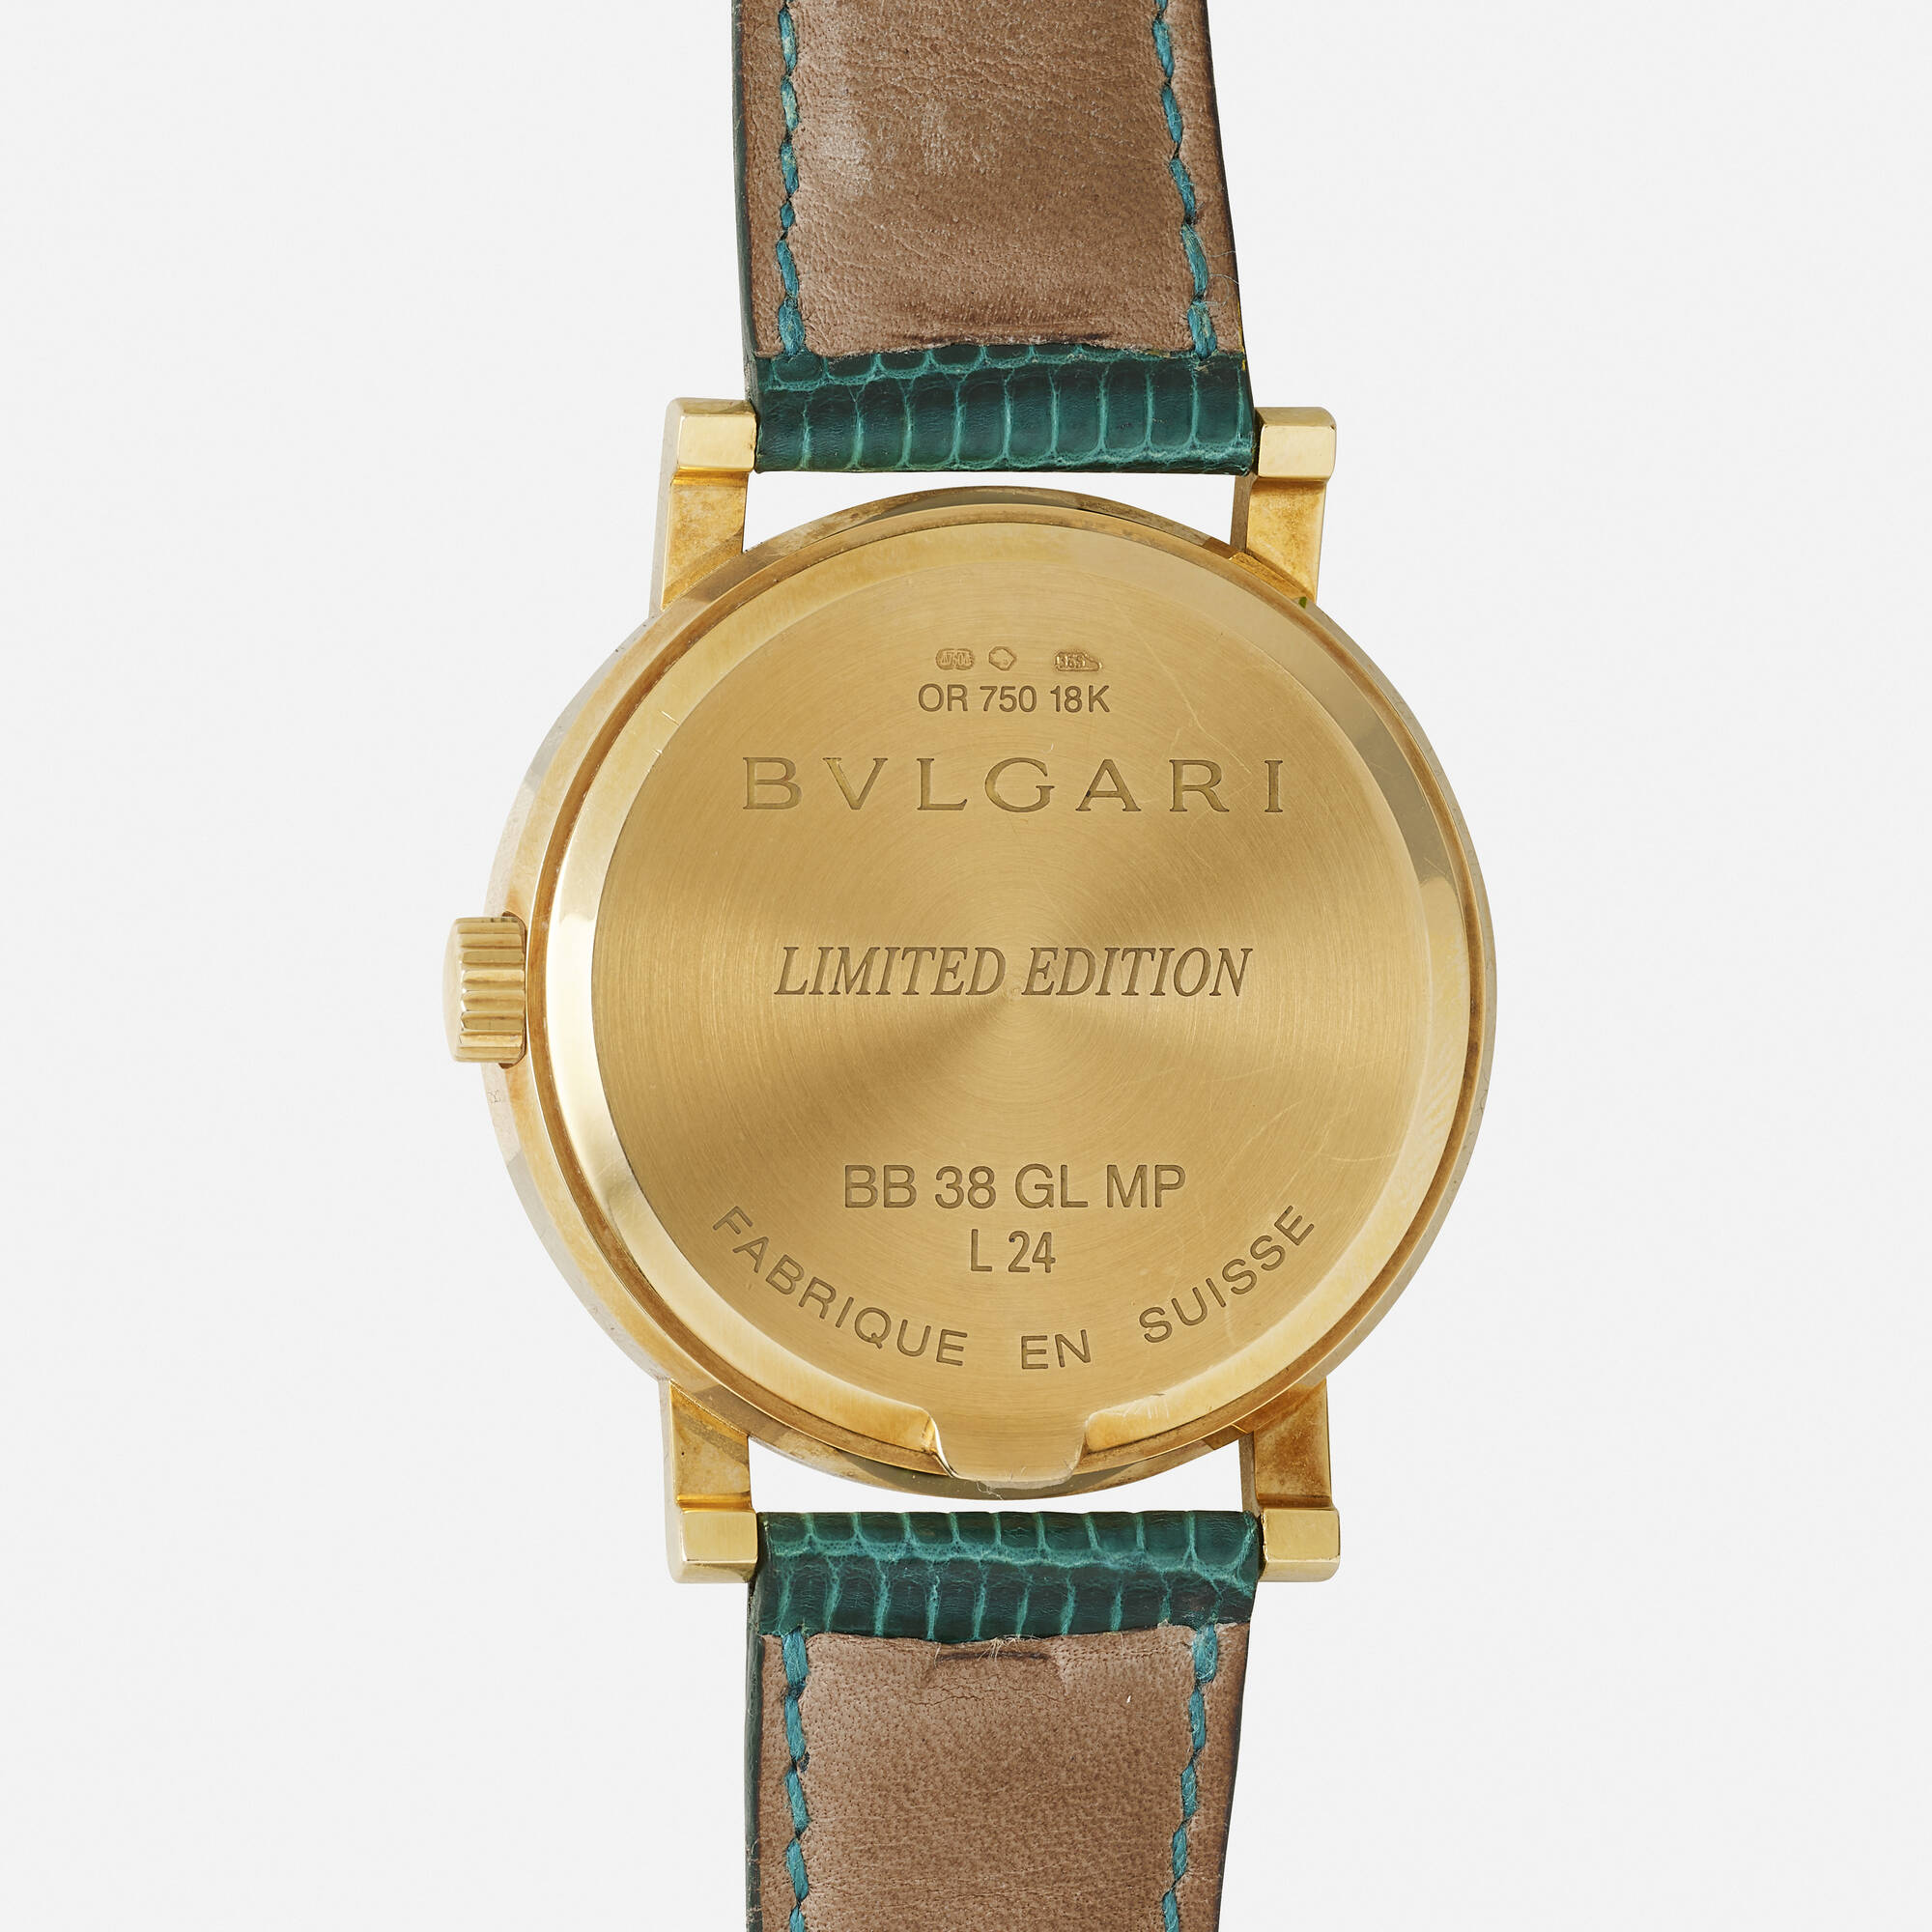 125: BULGARI, 'Bulgari Limited Edition' gold wristwatch, Ref. BB38GLMP <  Watches, 26 October 2022 < Auctions | Rago Auctions